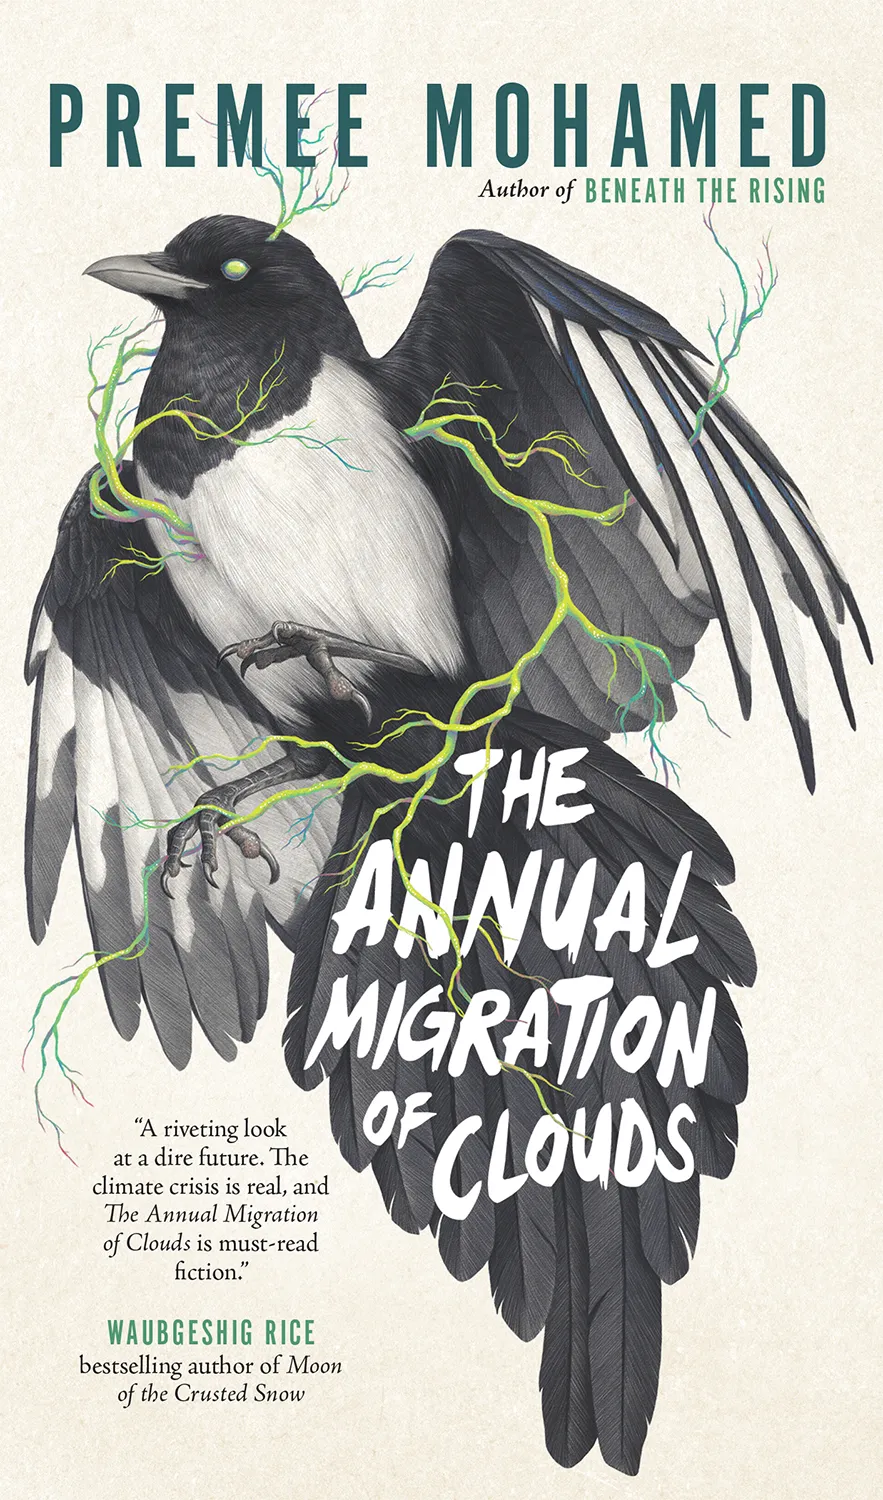 The Annual Migration of Clouds ( The Annual Migration of Clouds #1)